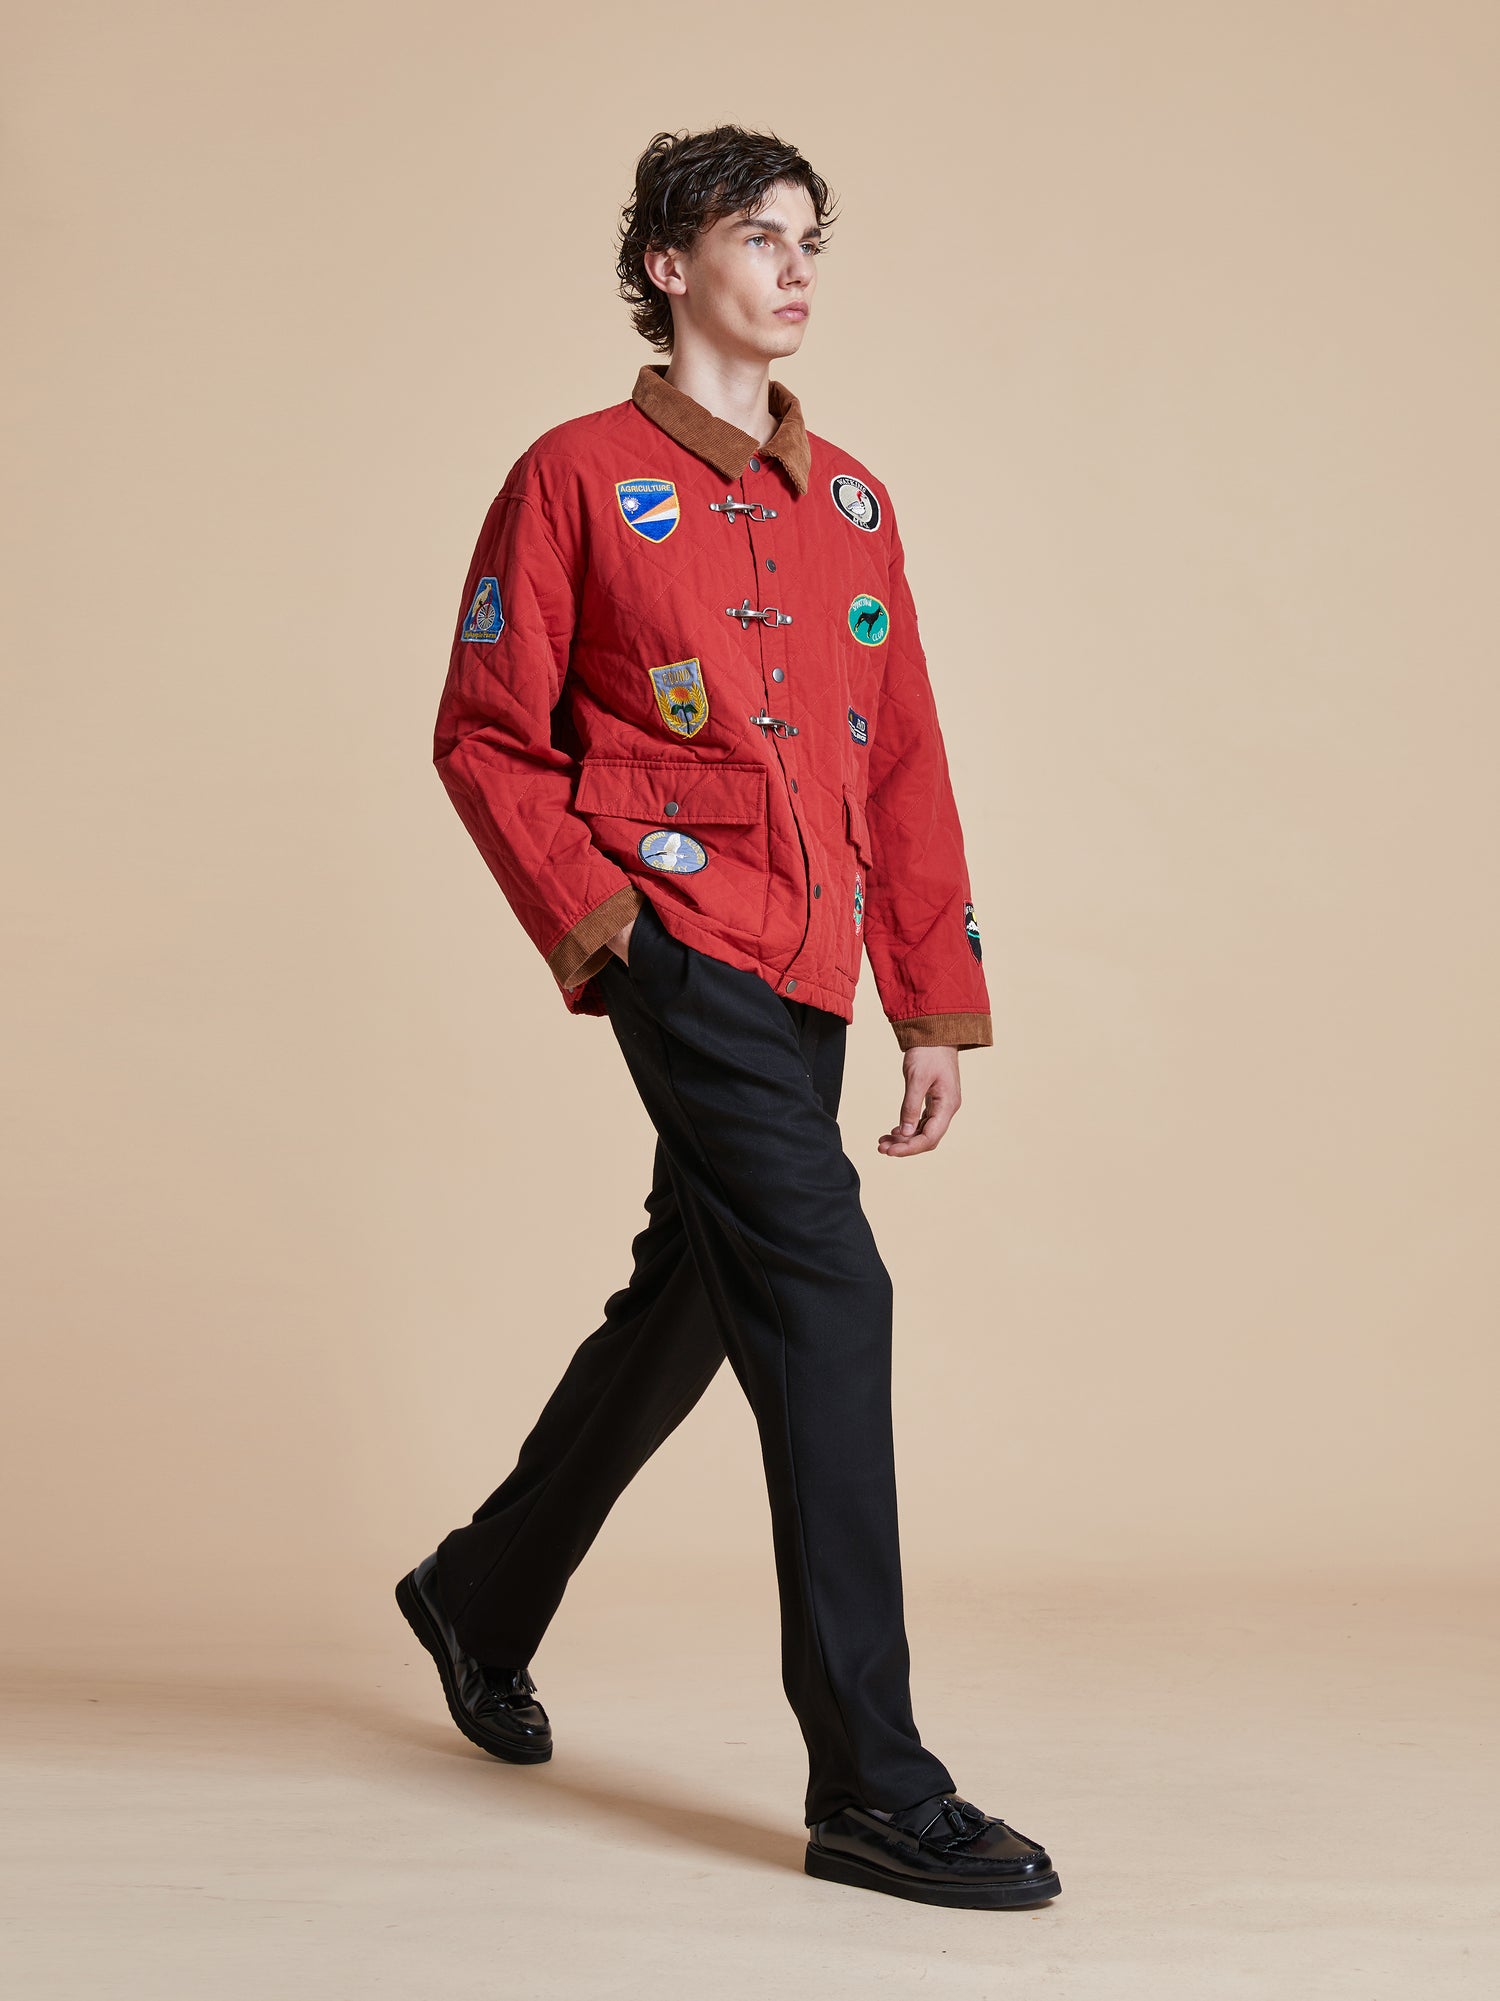 A man wearing a Farmstead Quilt Patch Jacket by Found and black pants.